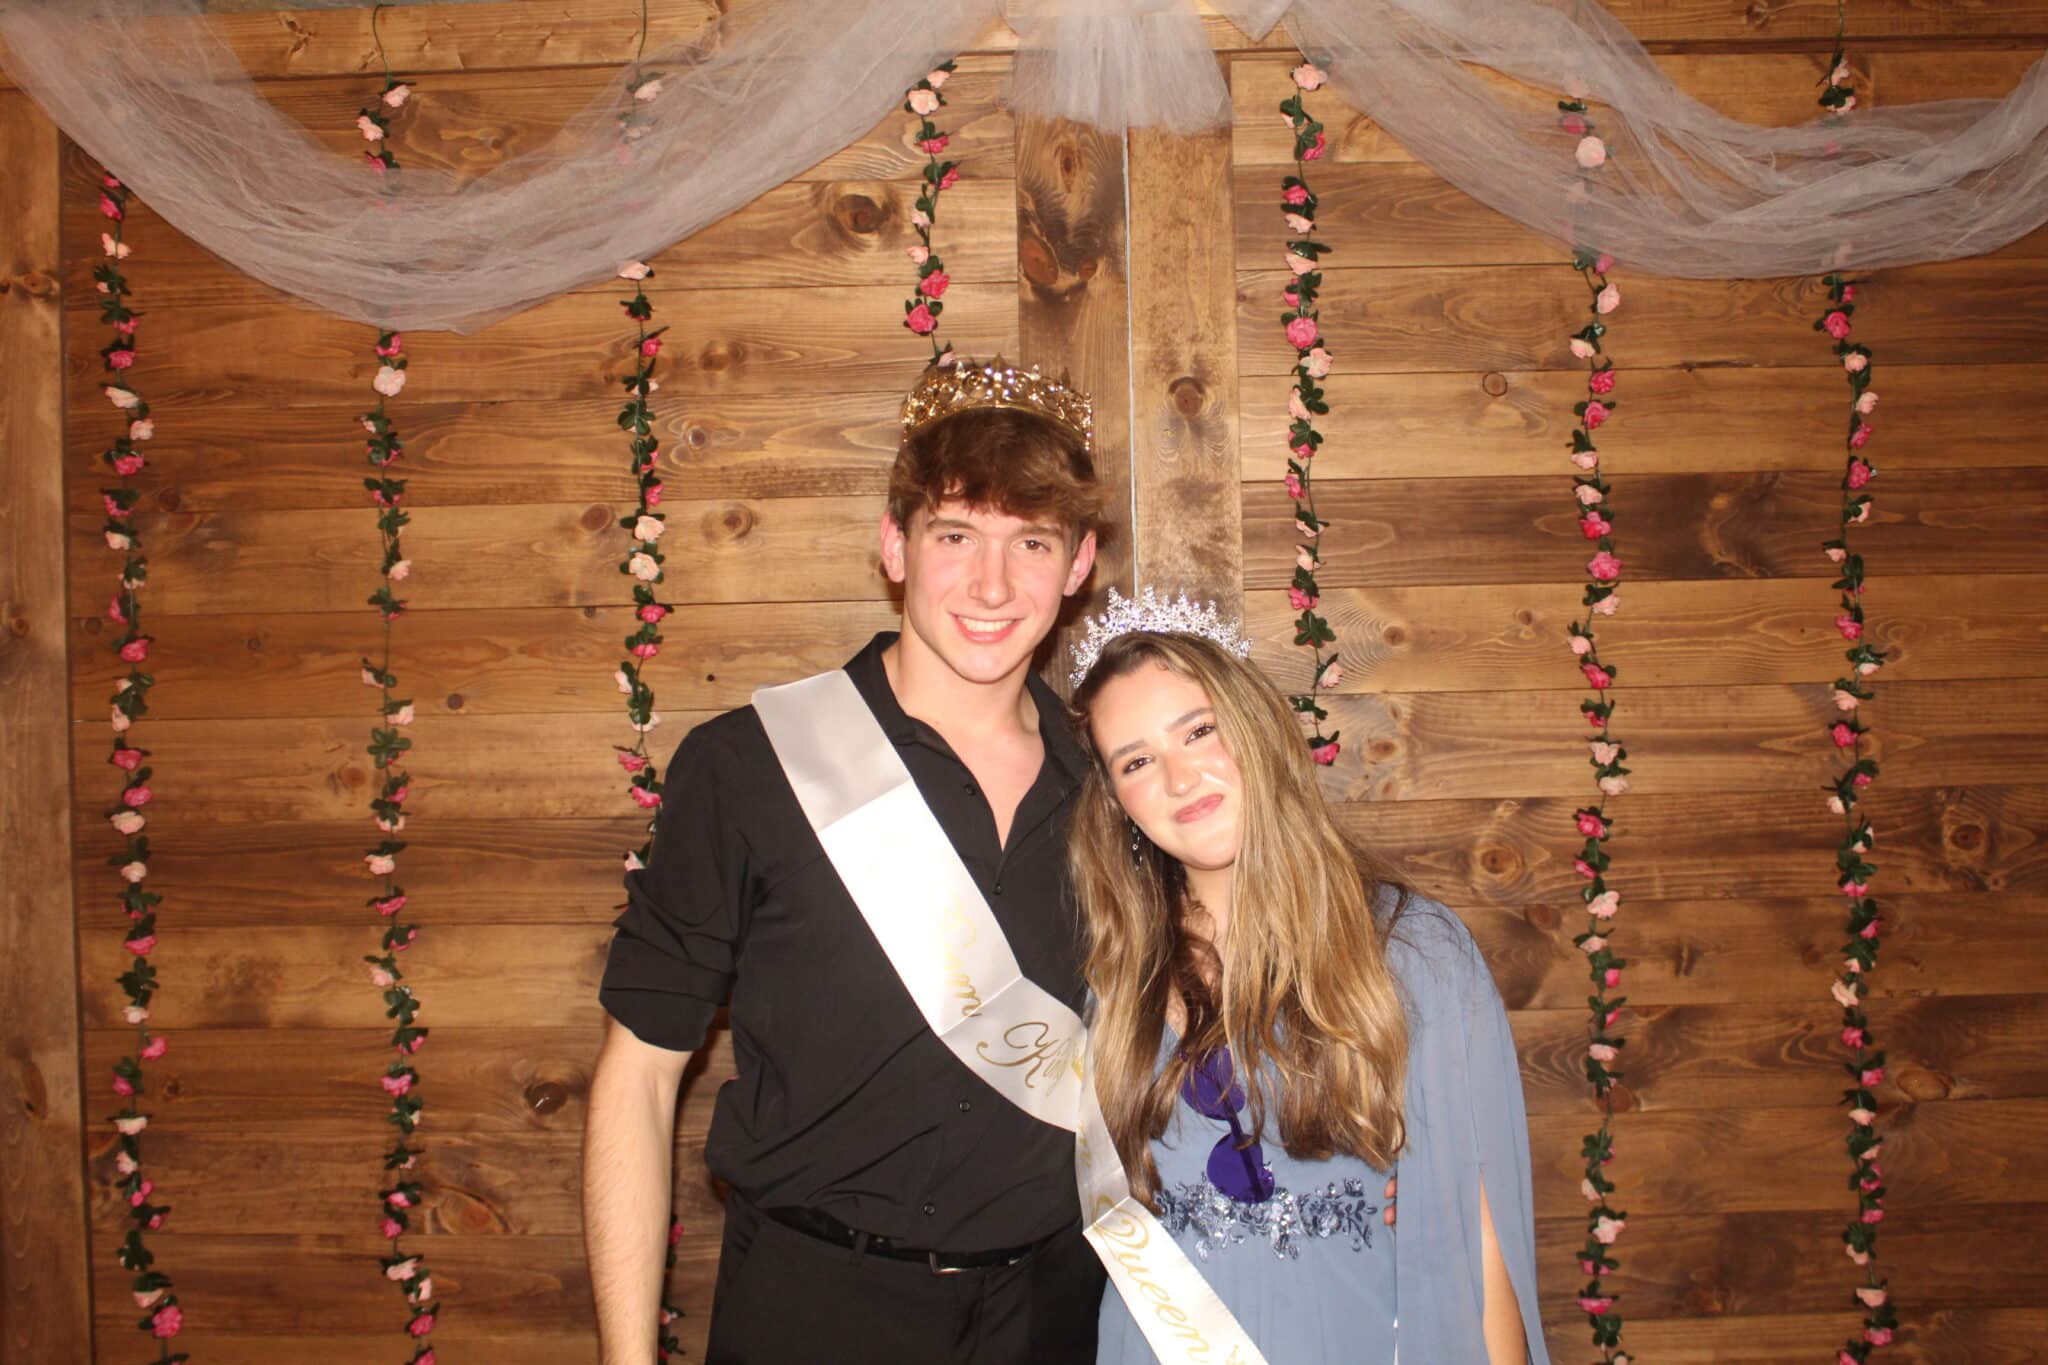 SCA Seniors Cason Stone from Raymore and Vega Gastaldo from Spain were crowned the SCA 2023 Prom King and Queen at the dinner and dance held recently.